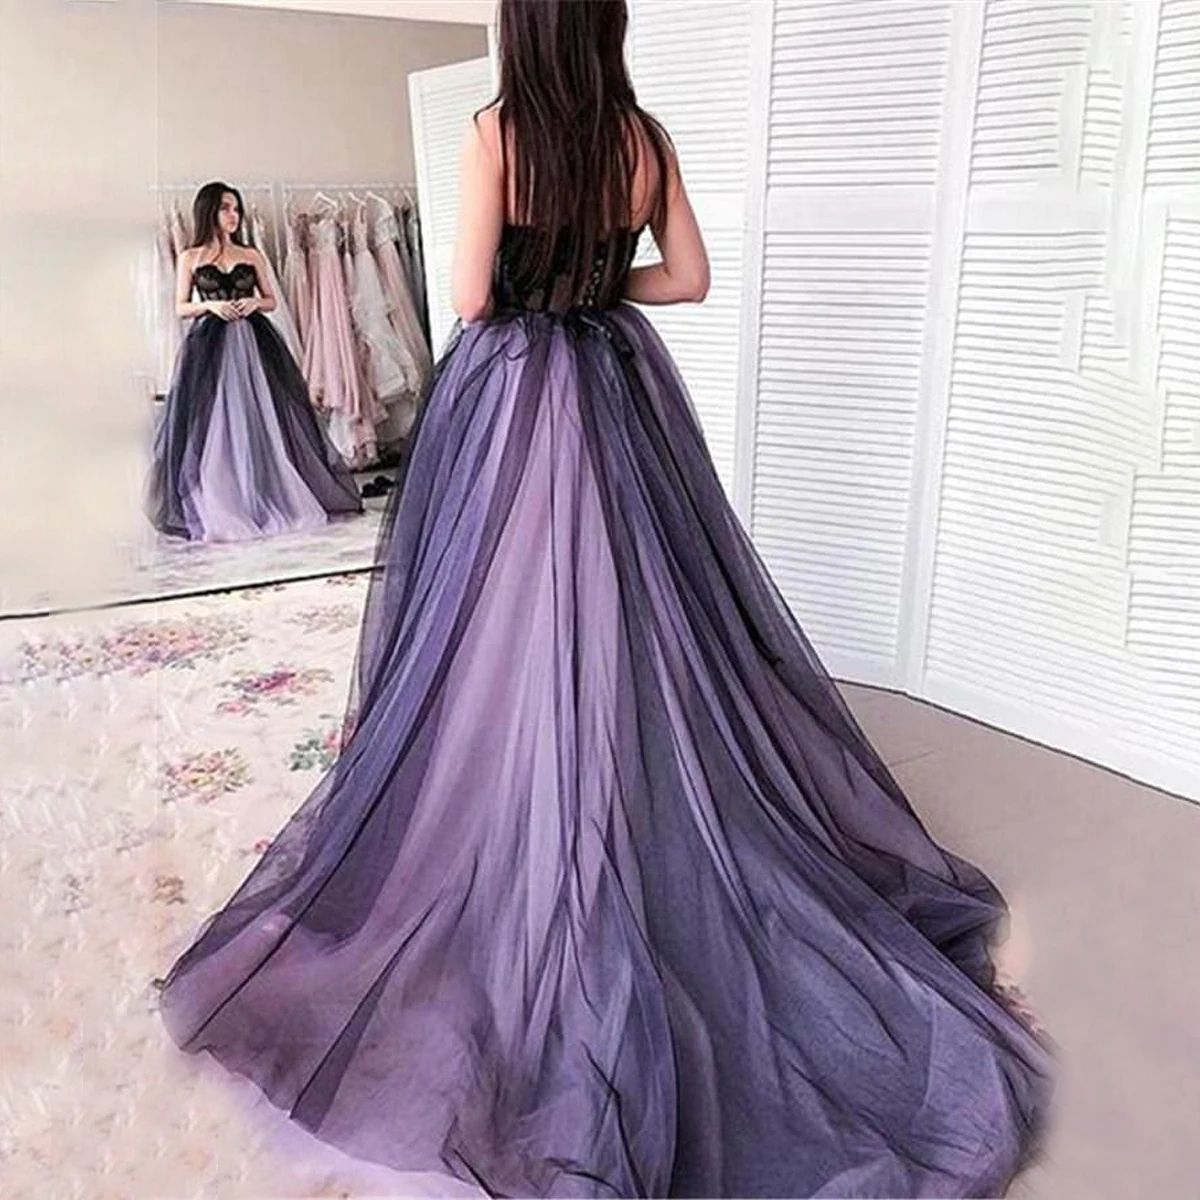 Ombre Gothic Fairy Fantasy Wedding Gowns Purple And Black Lace Ball Gown  Wedding… | Wedding dresses lace ballgown, Black lace ball gown, Fantasy gown